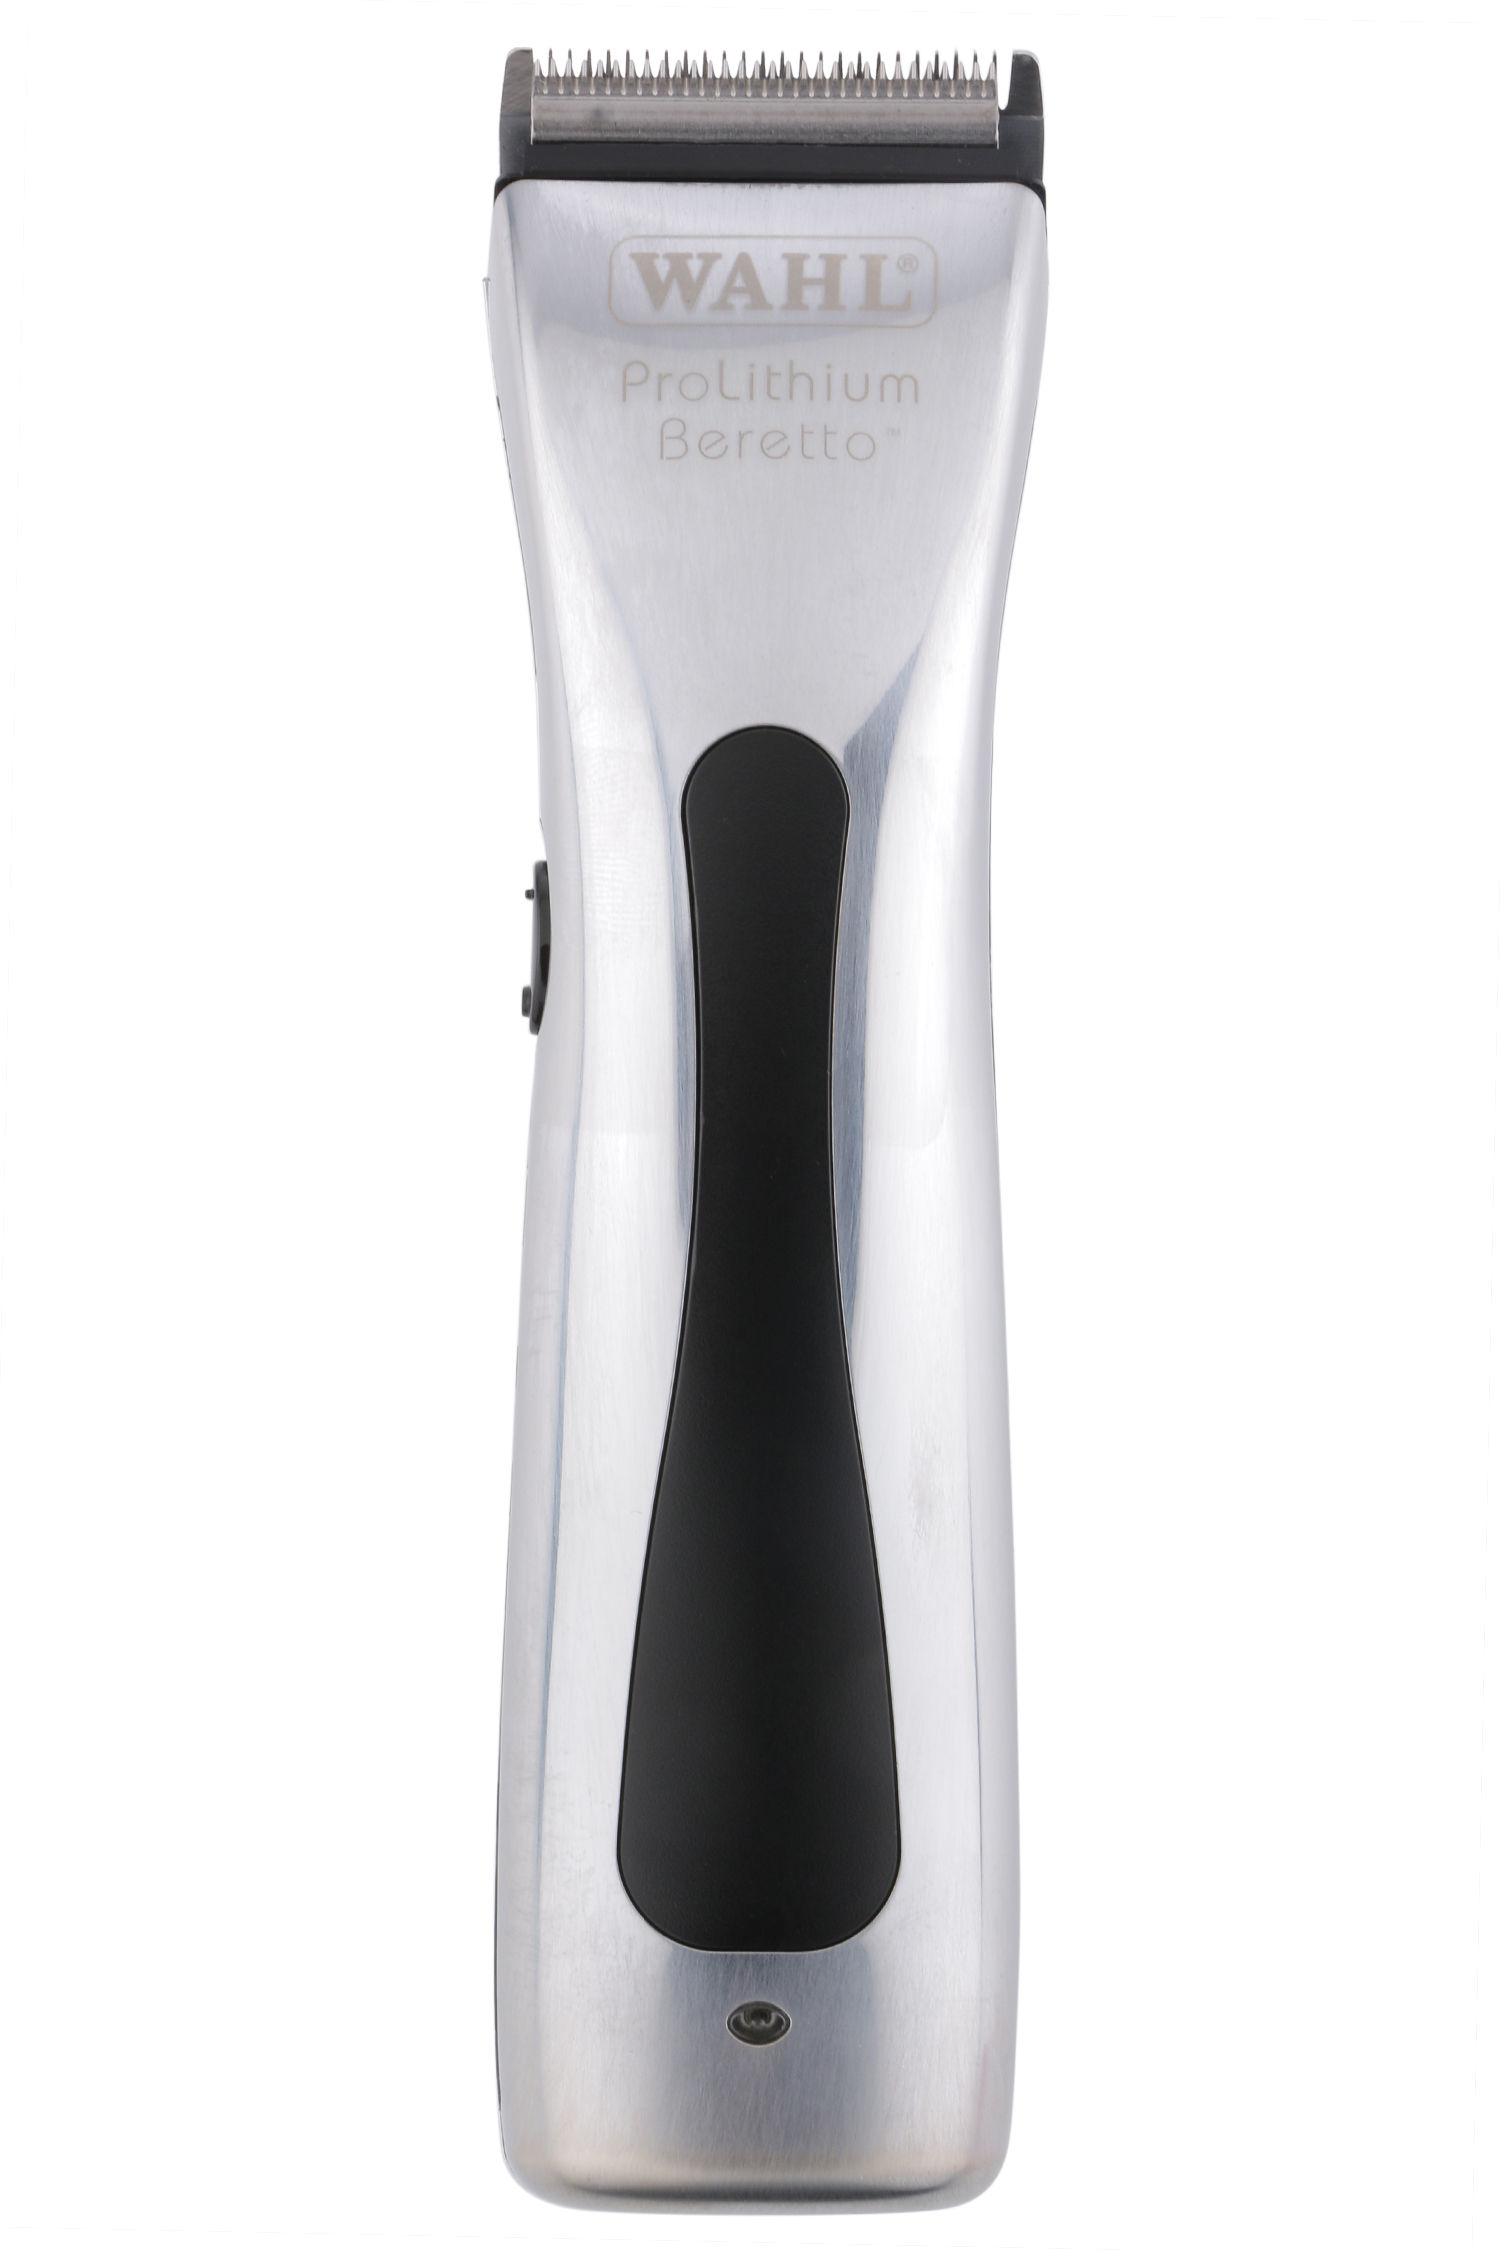 wahl beretto review